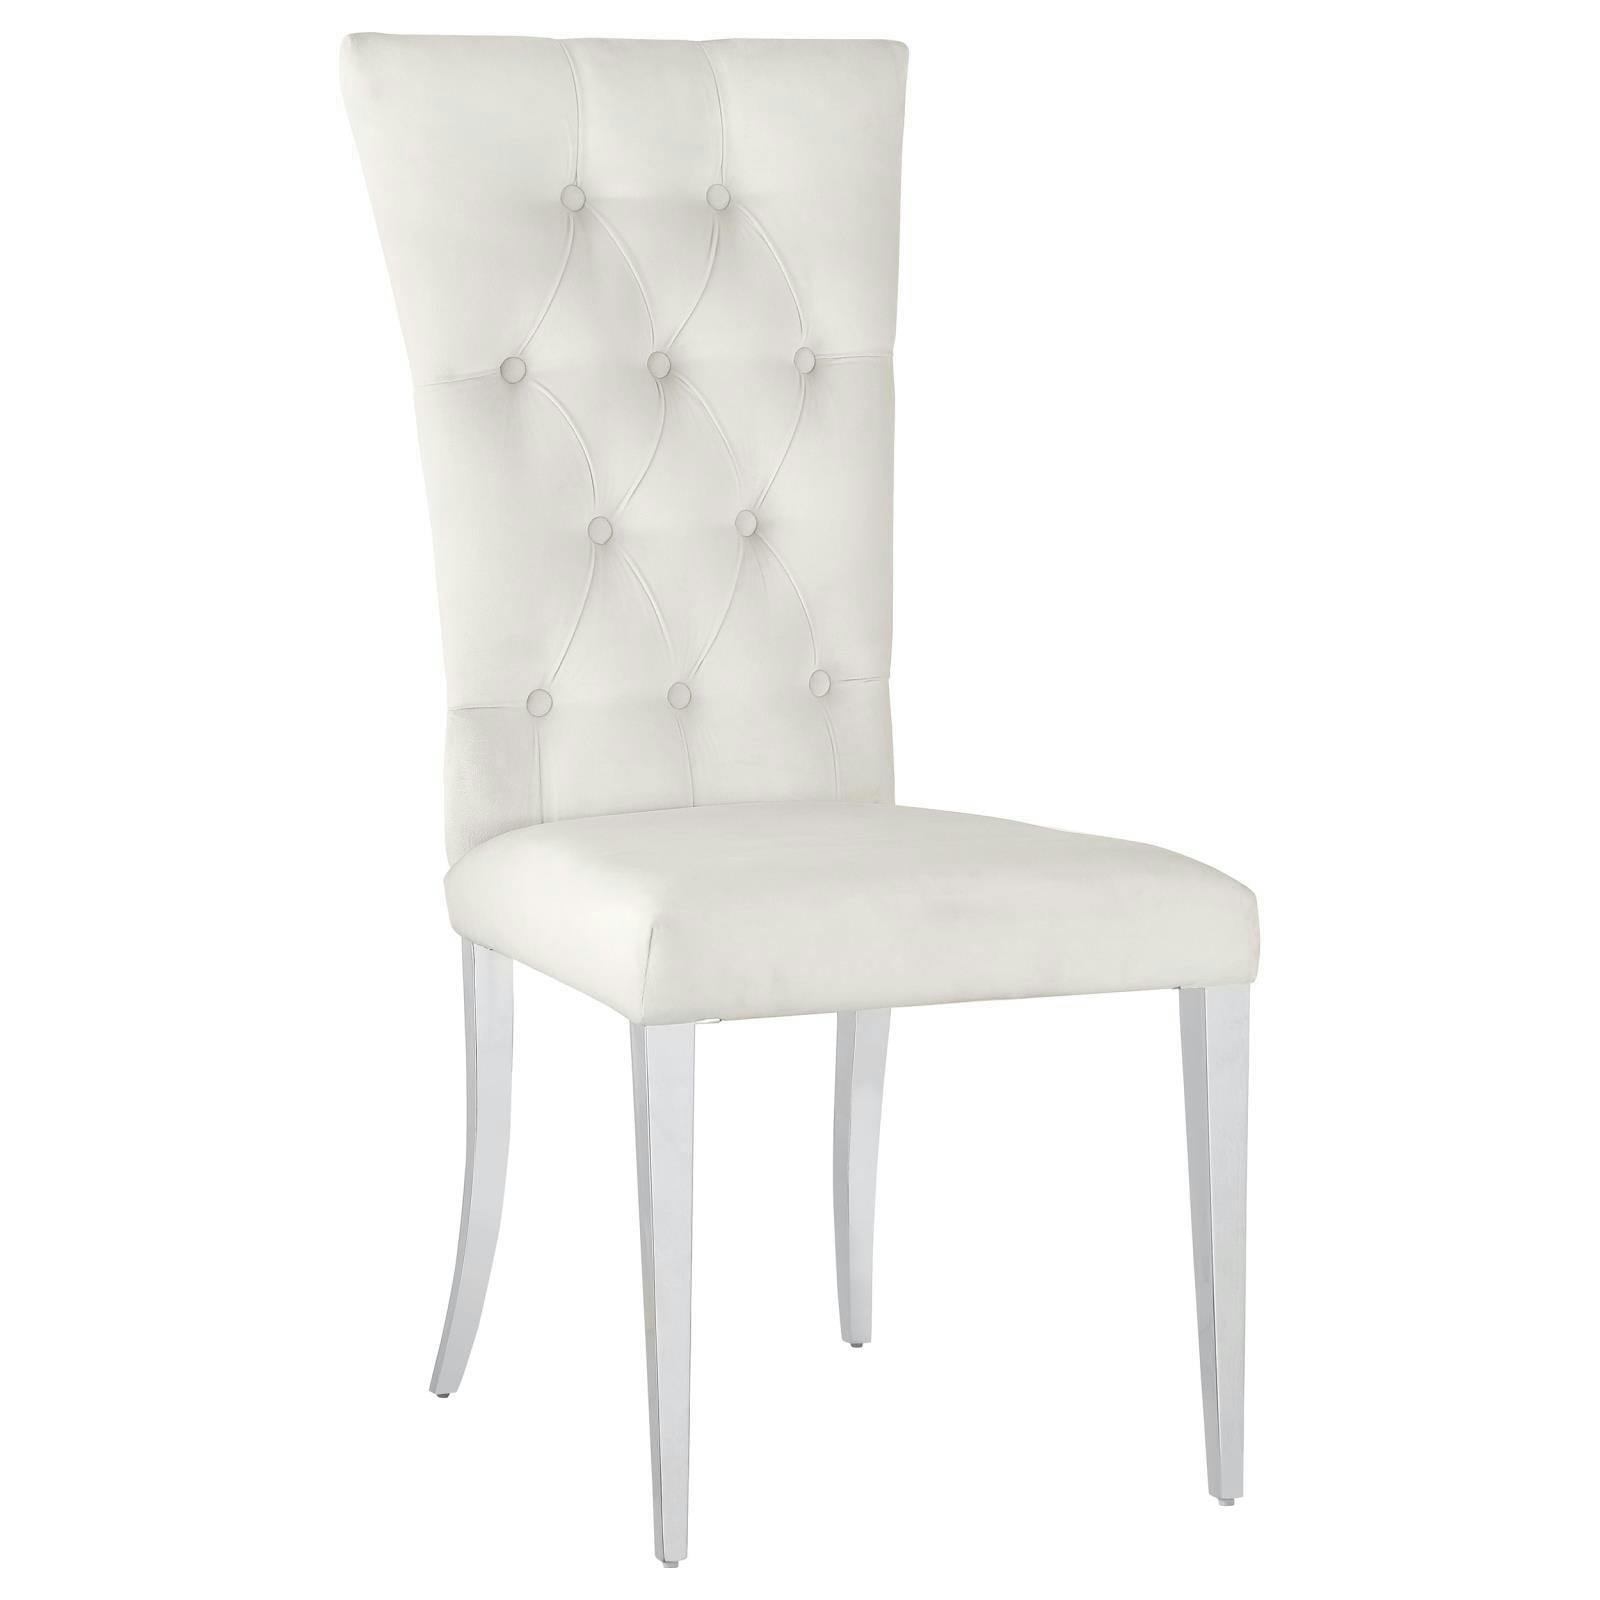 Parsons White Velvet Side Chair with Polished Chrome Legs